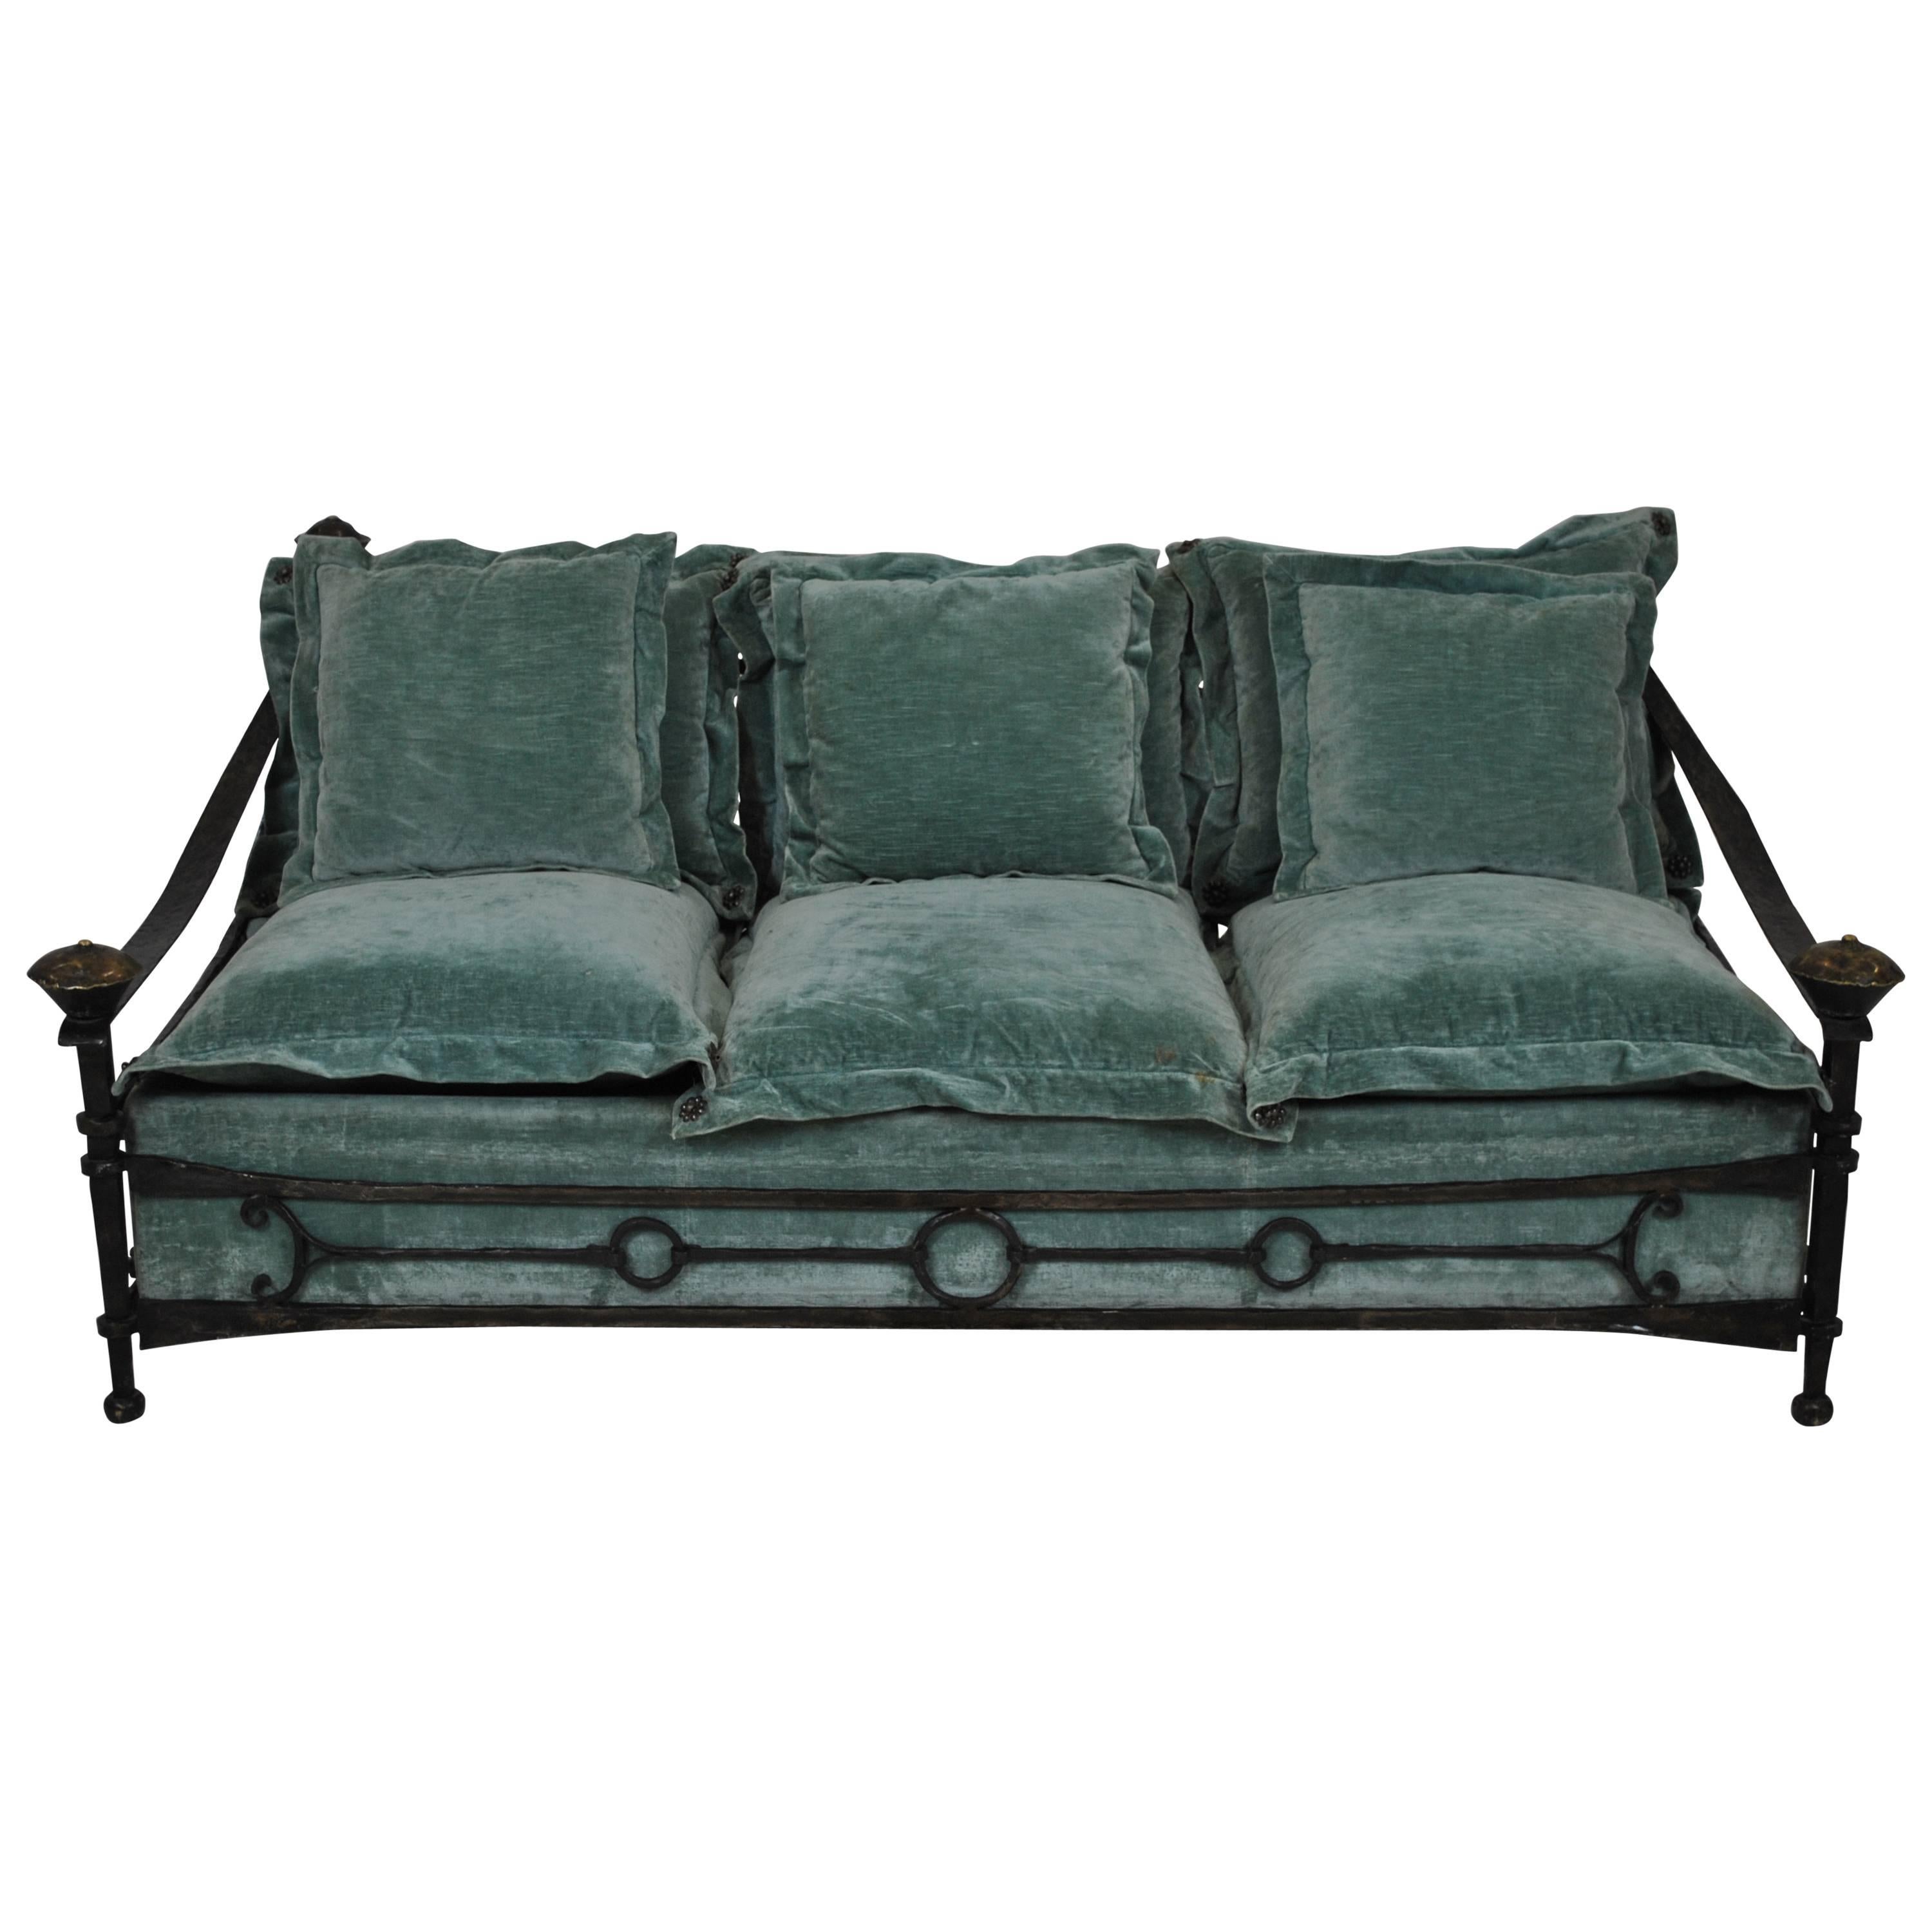 Important Wrought Iron Sofa by Sido & FrançOis Thevenin, France, 1970s For Sale